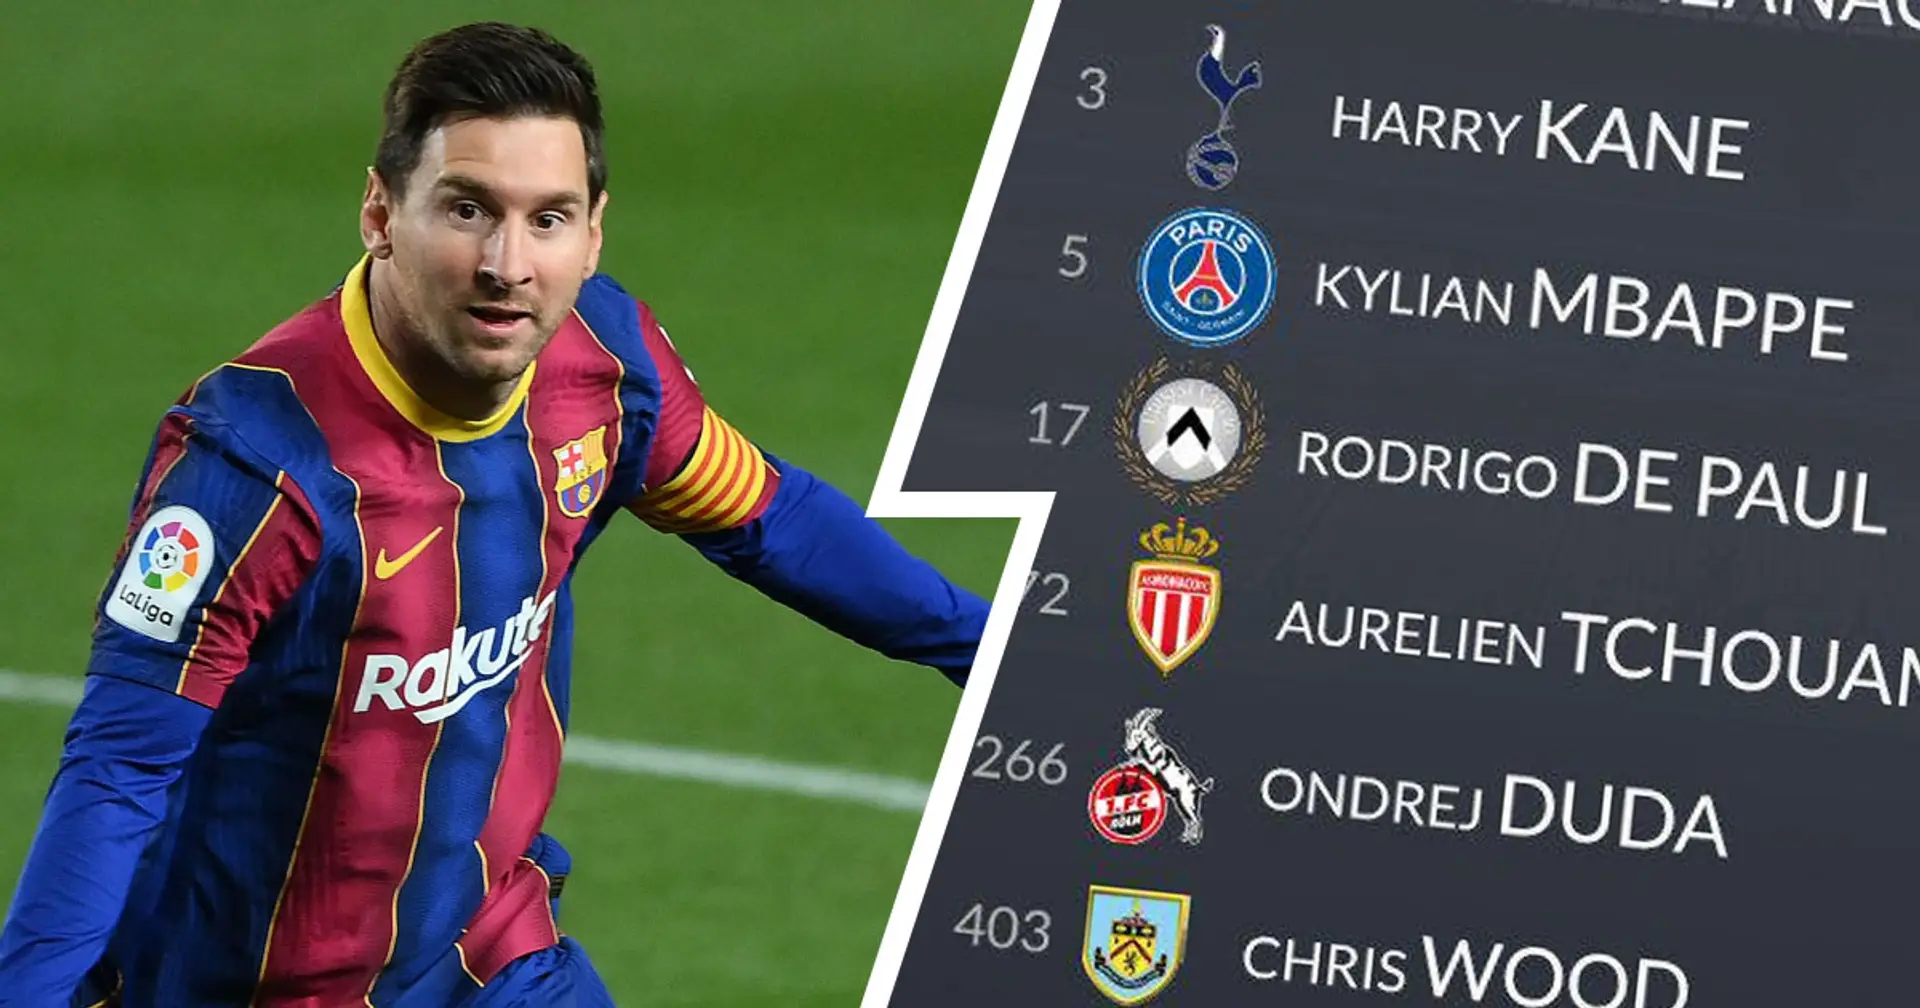 Ballon d'Or-worthy: Leo Messi most in-form player according to WhoScored